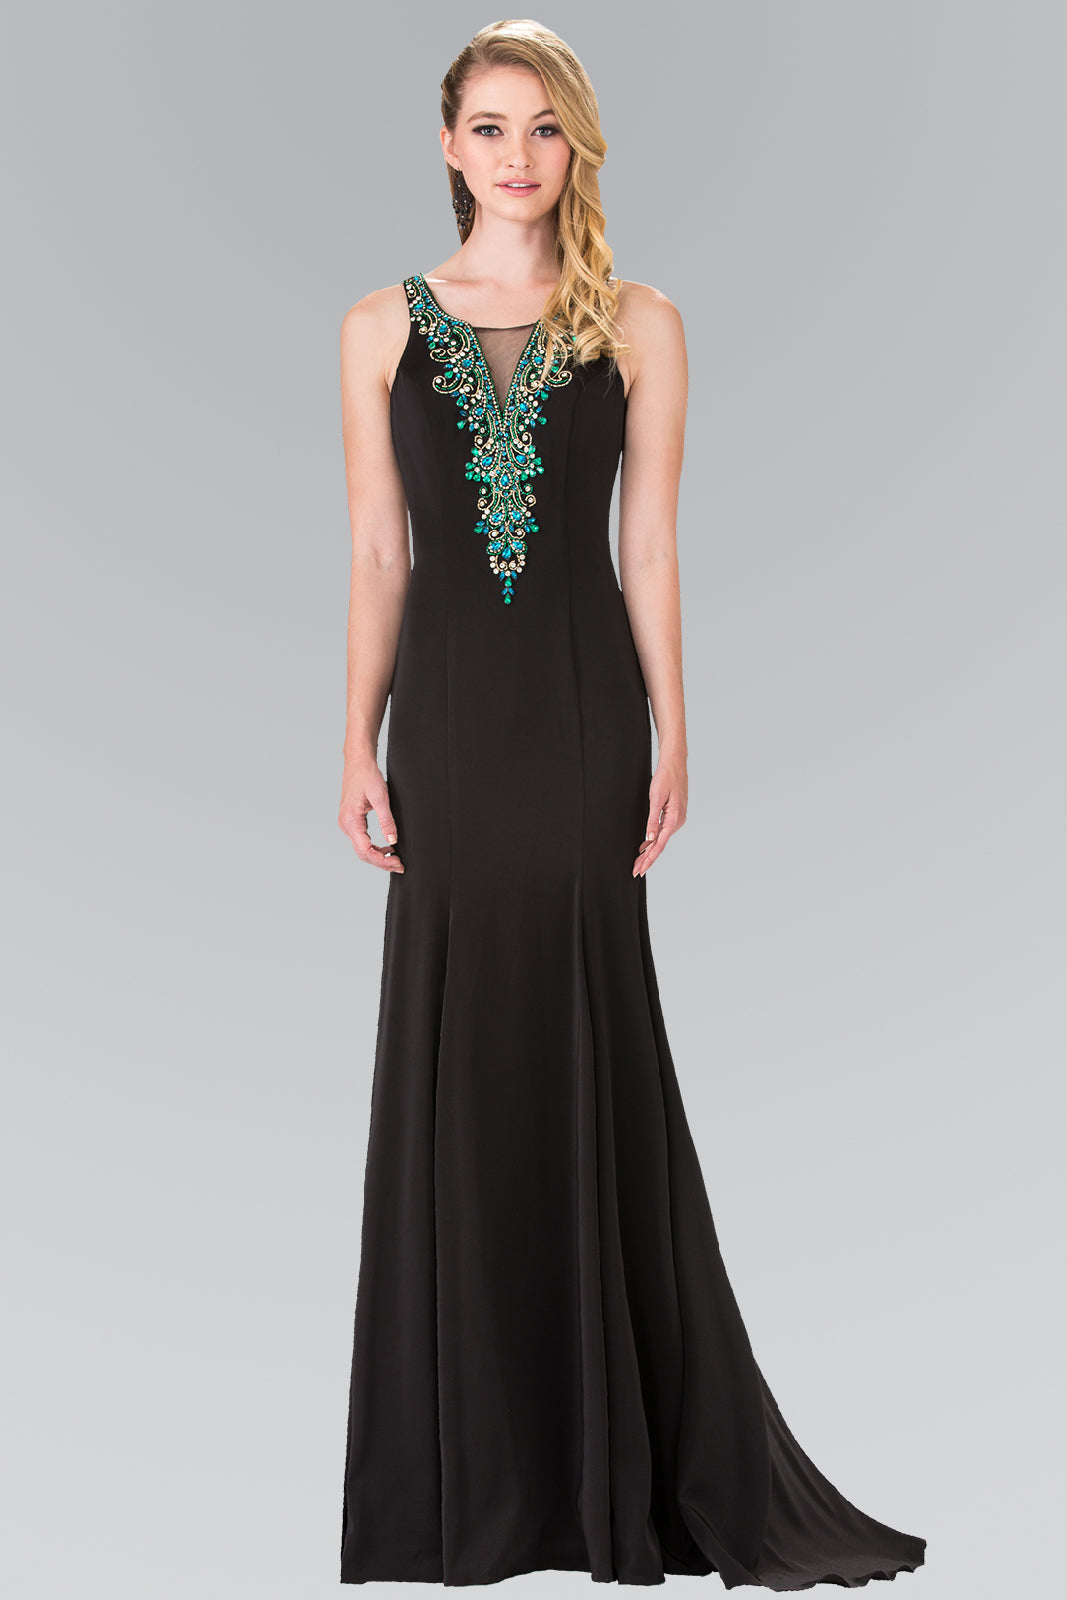 Illusion V-Neck Beaded Top Long Dress with Sheer Back GLGL2310 Elsy Style PROM